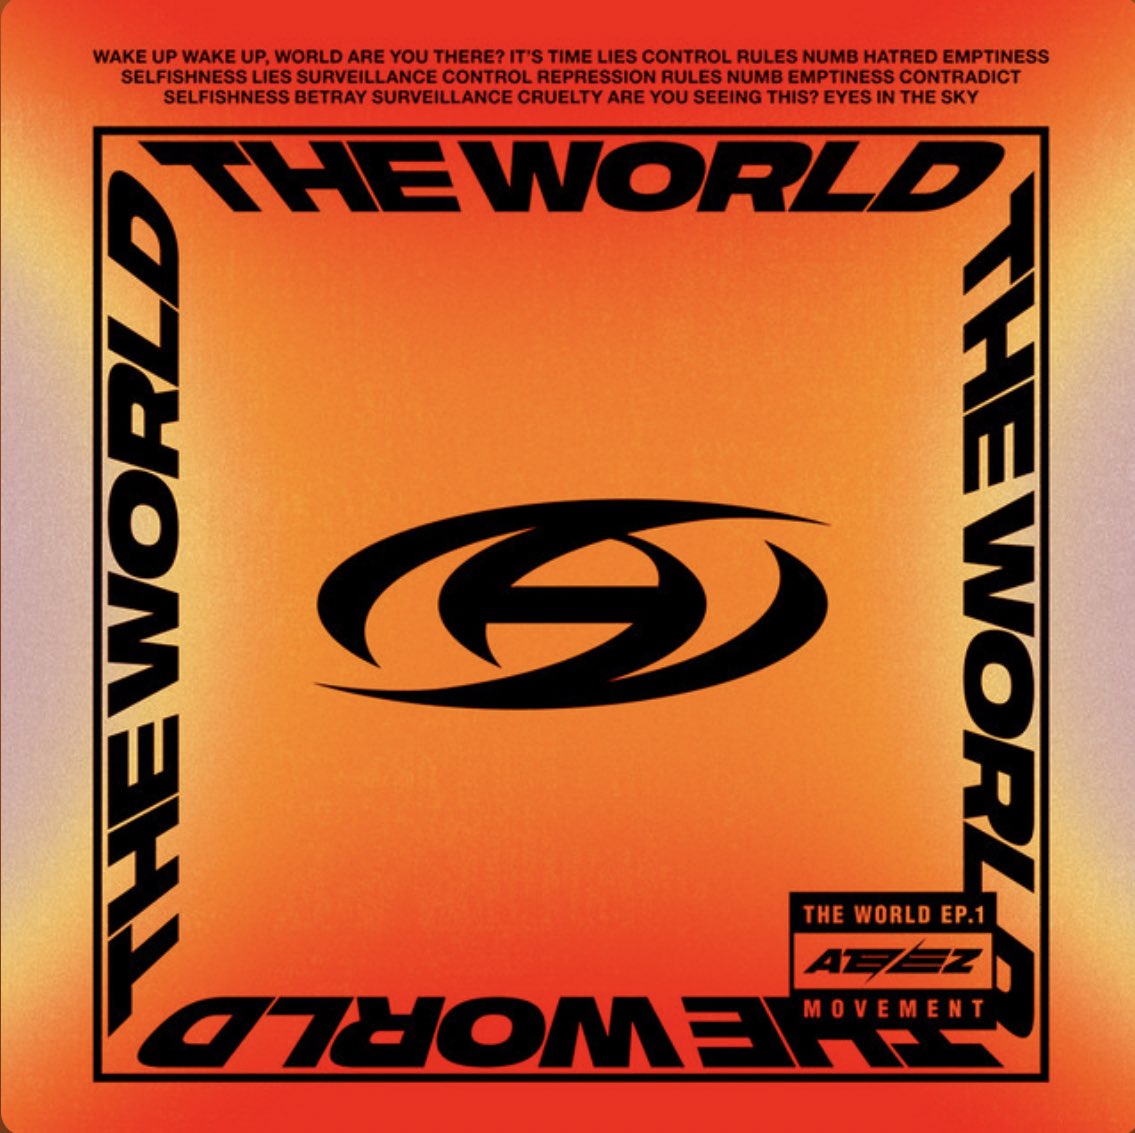 Share an album cover that’s orange?

My pick:
The World EP 1: The Movement by Ateez